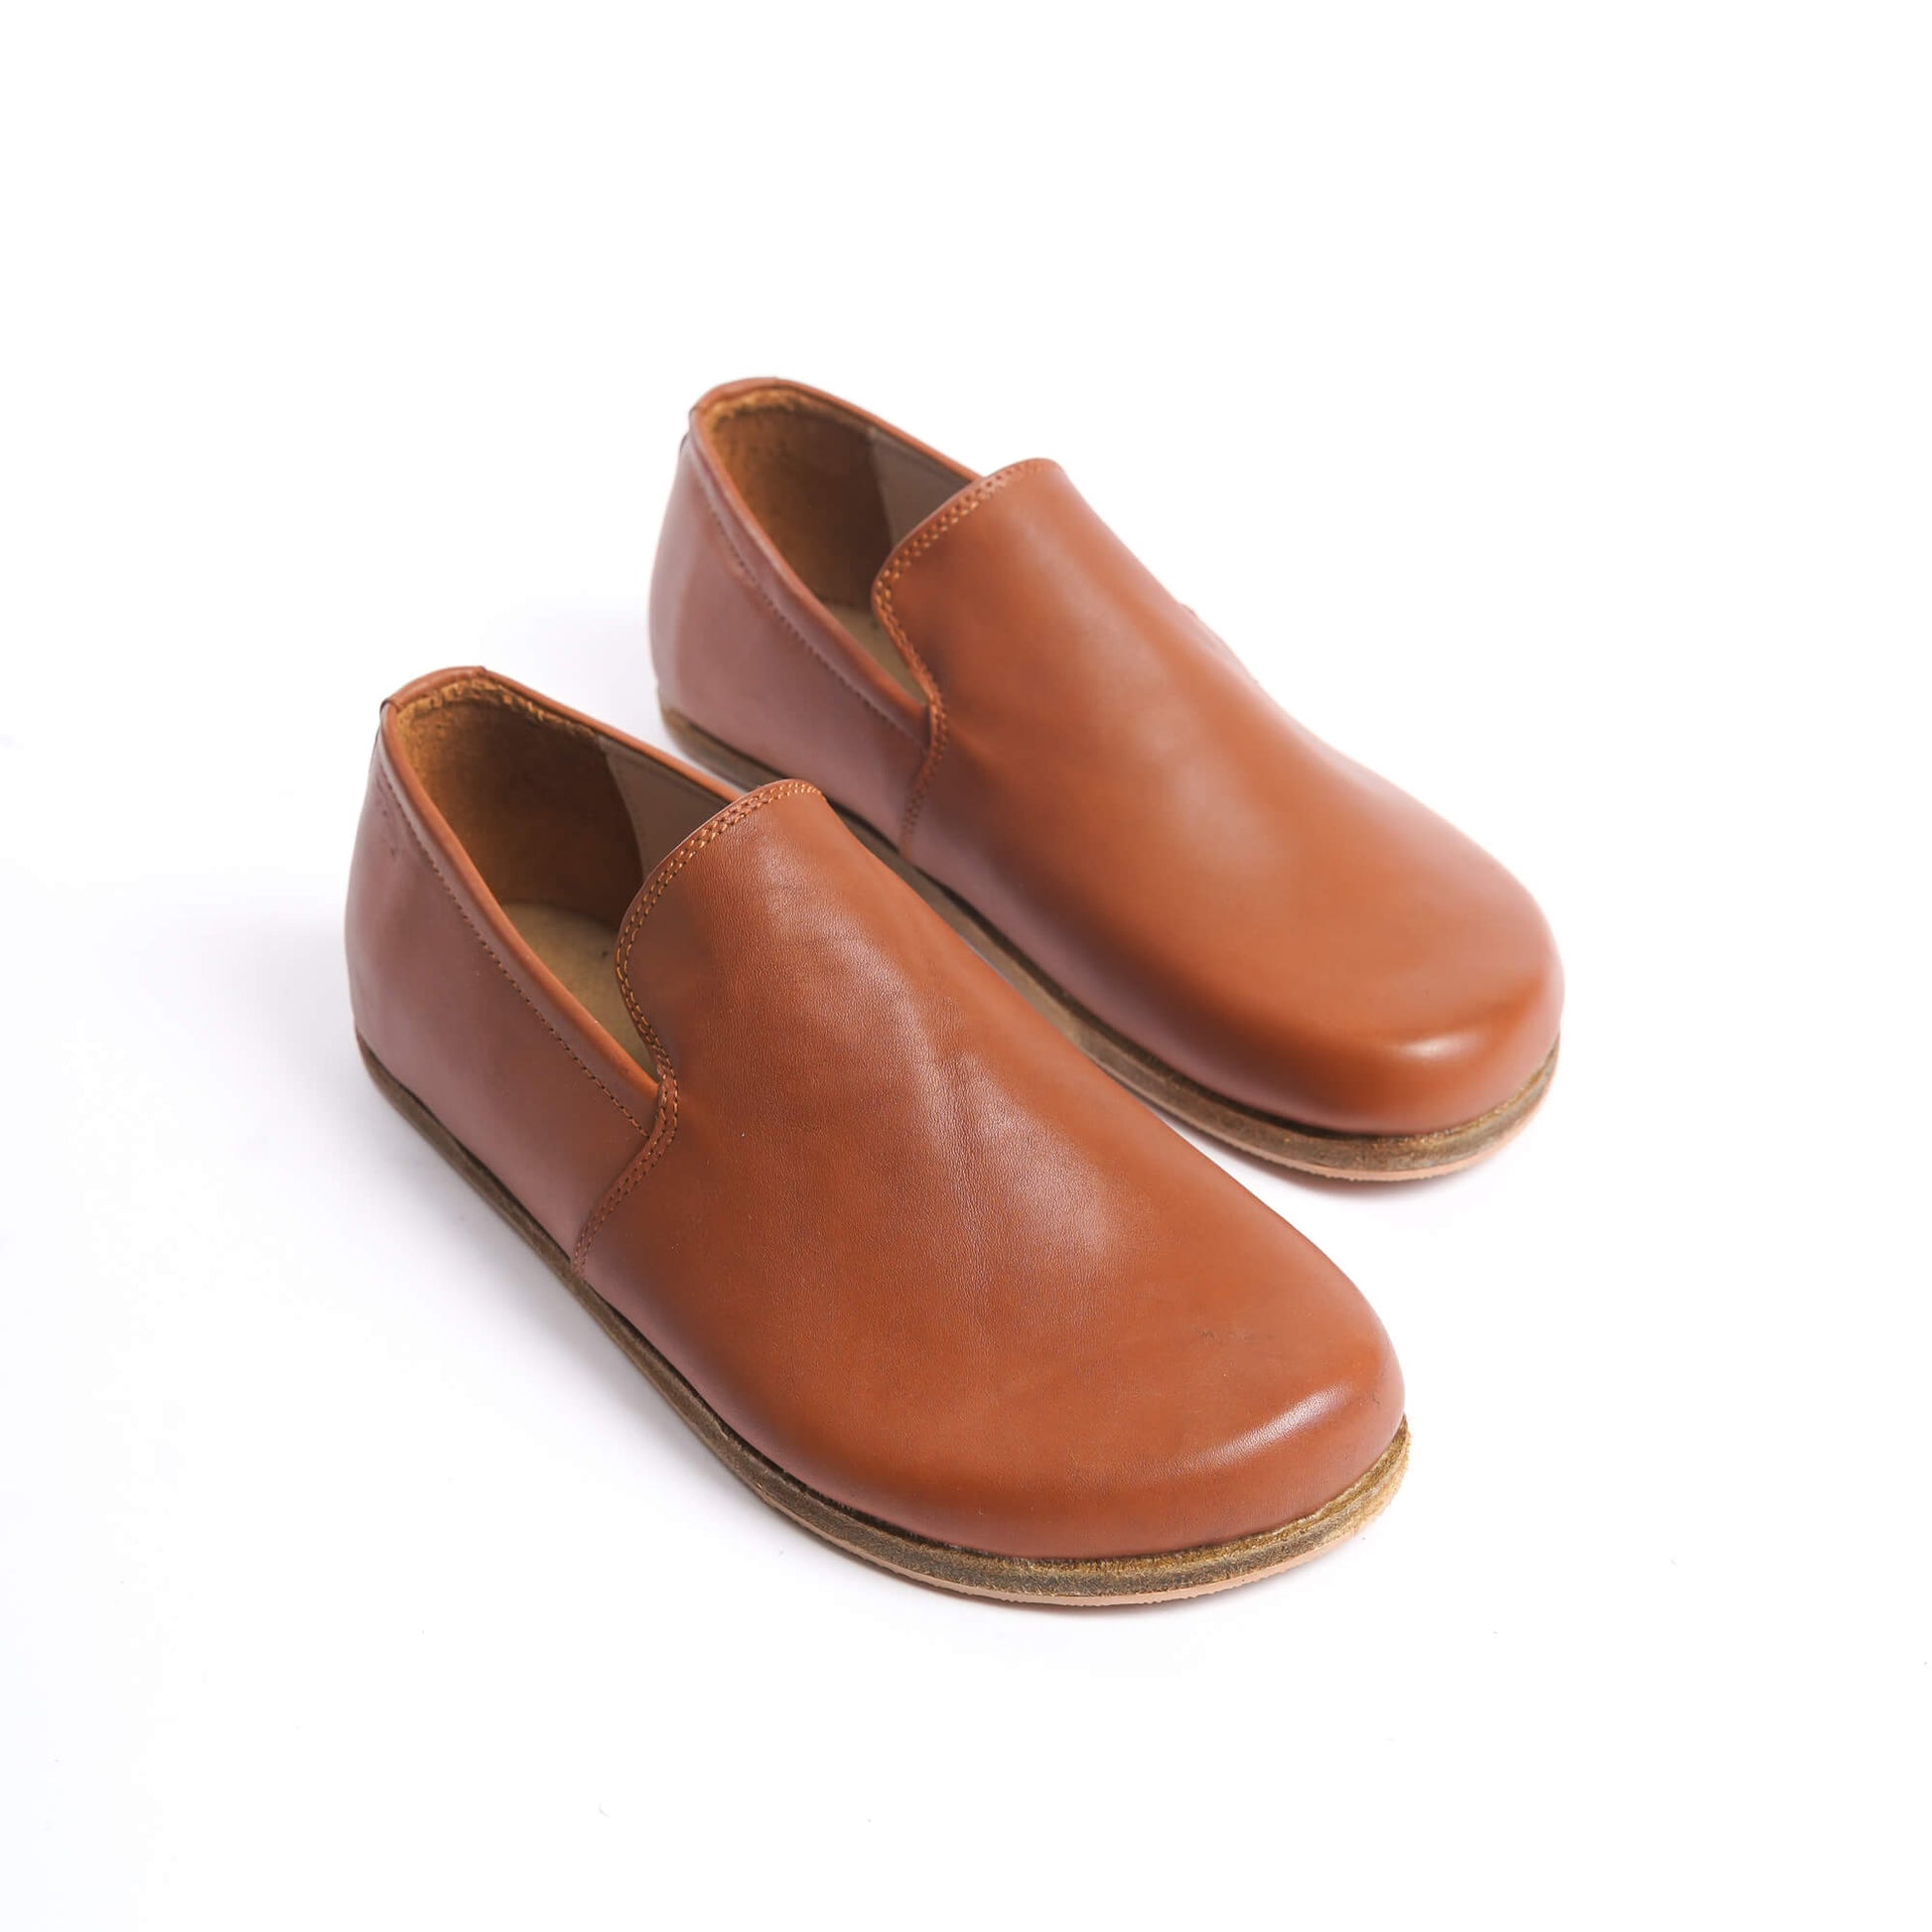 Aeolia tan brown leather barefoot women loafers, featuring a minimalist and comfortable design.